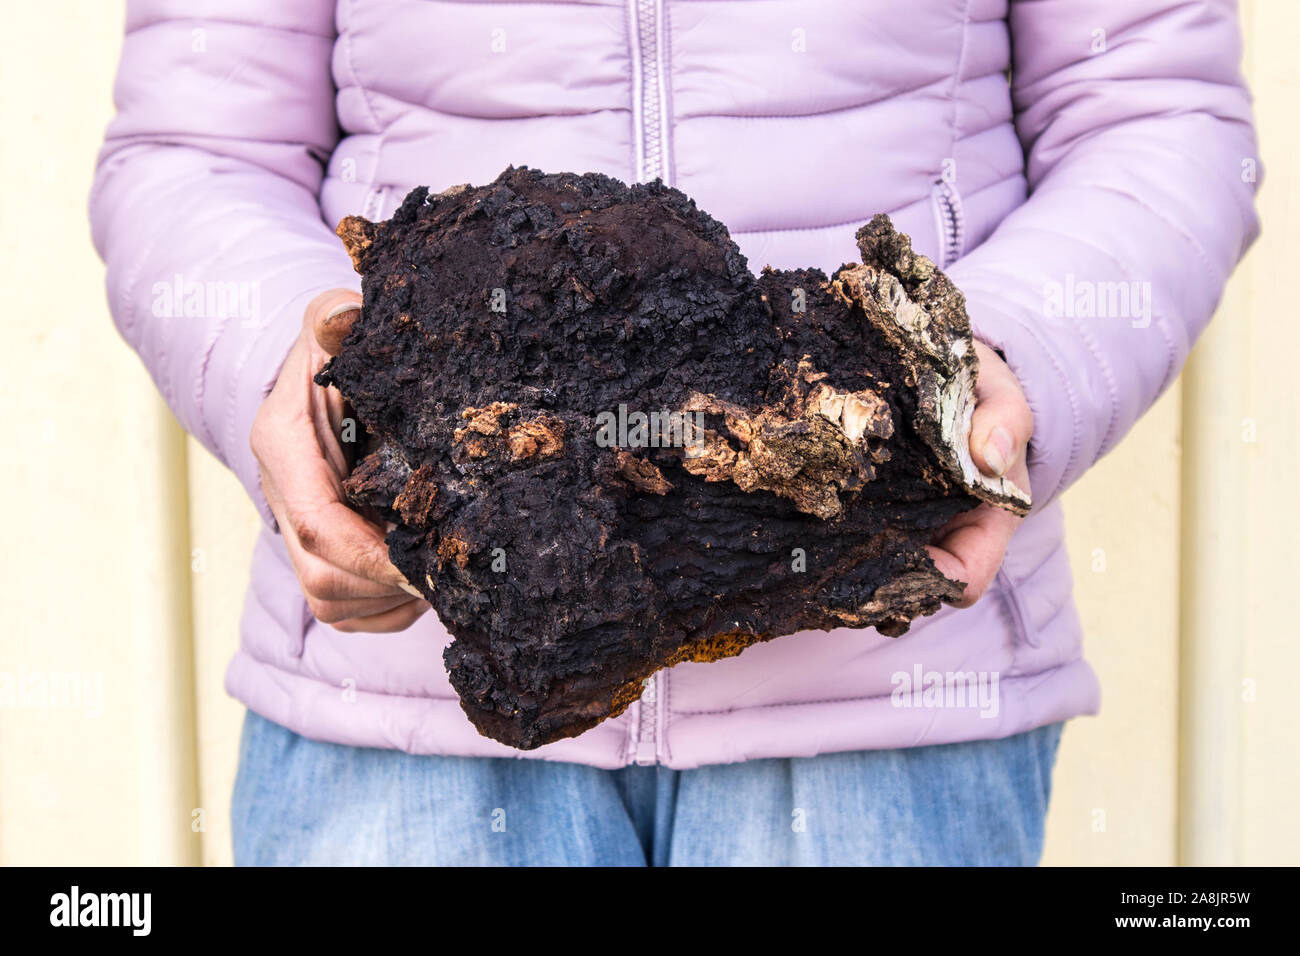 Close up view of woman showing and holding fresh large over 20 years old and 3 kg big wild natural organic Chaga mushroom, Inonotus obliquus. Herbal m Stock Photo